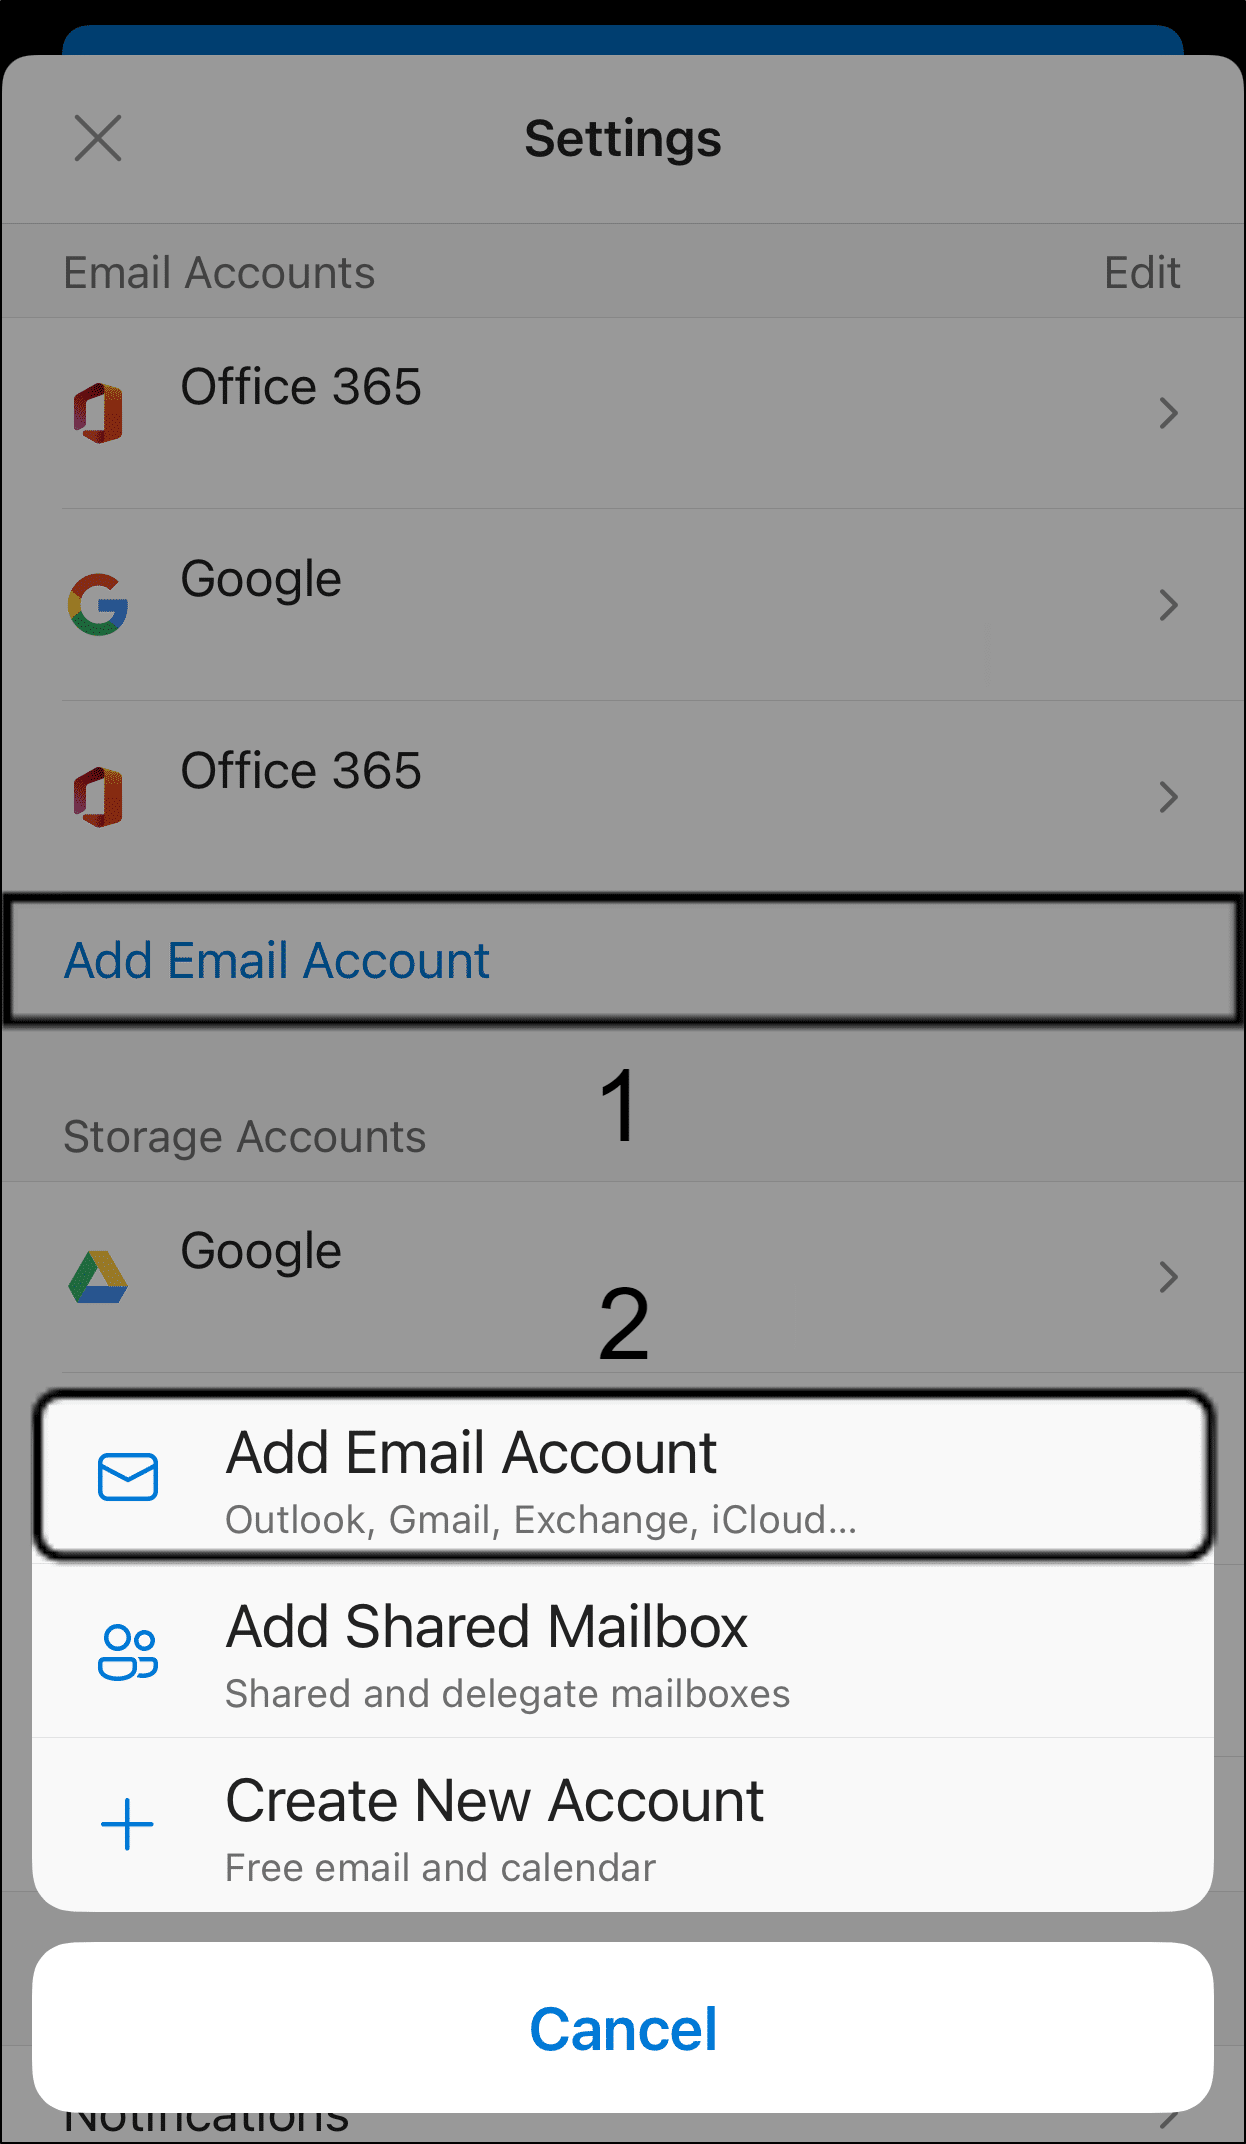 log back into email account on Microsoft Outlook app to fix Microsoft Outlook app email notifications not working on iOS or Android